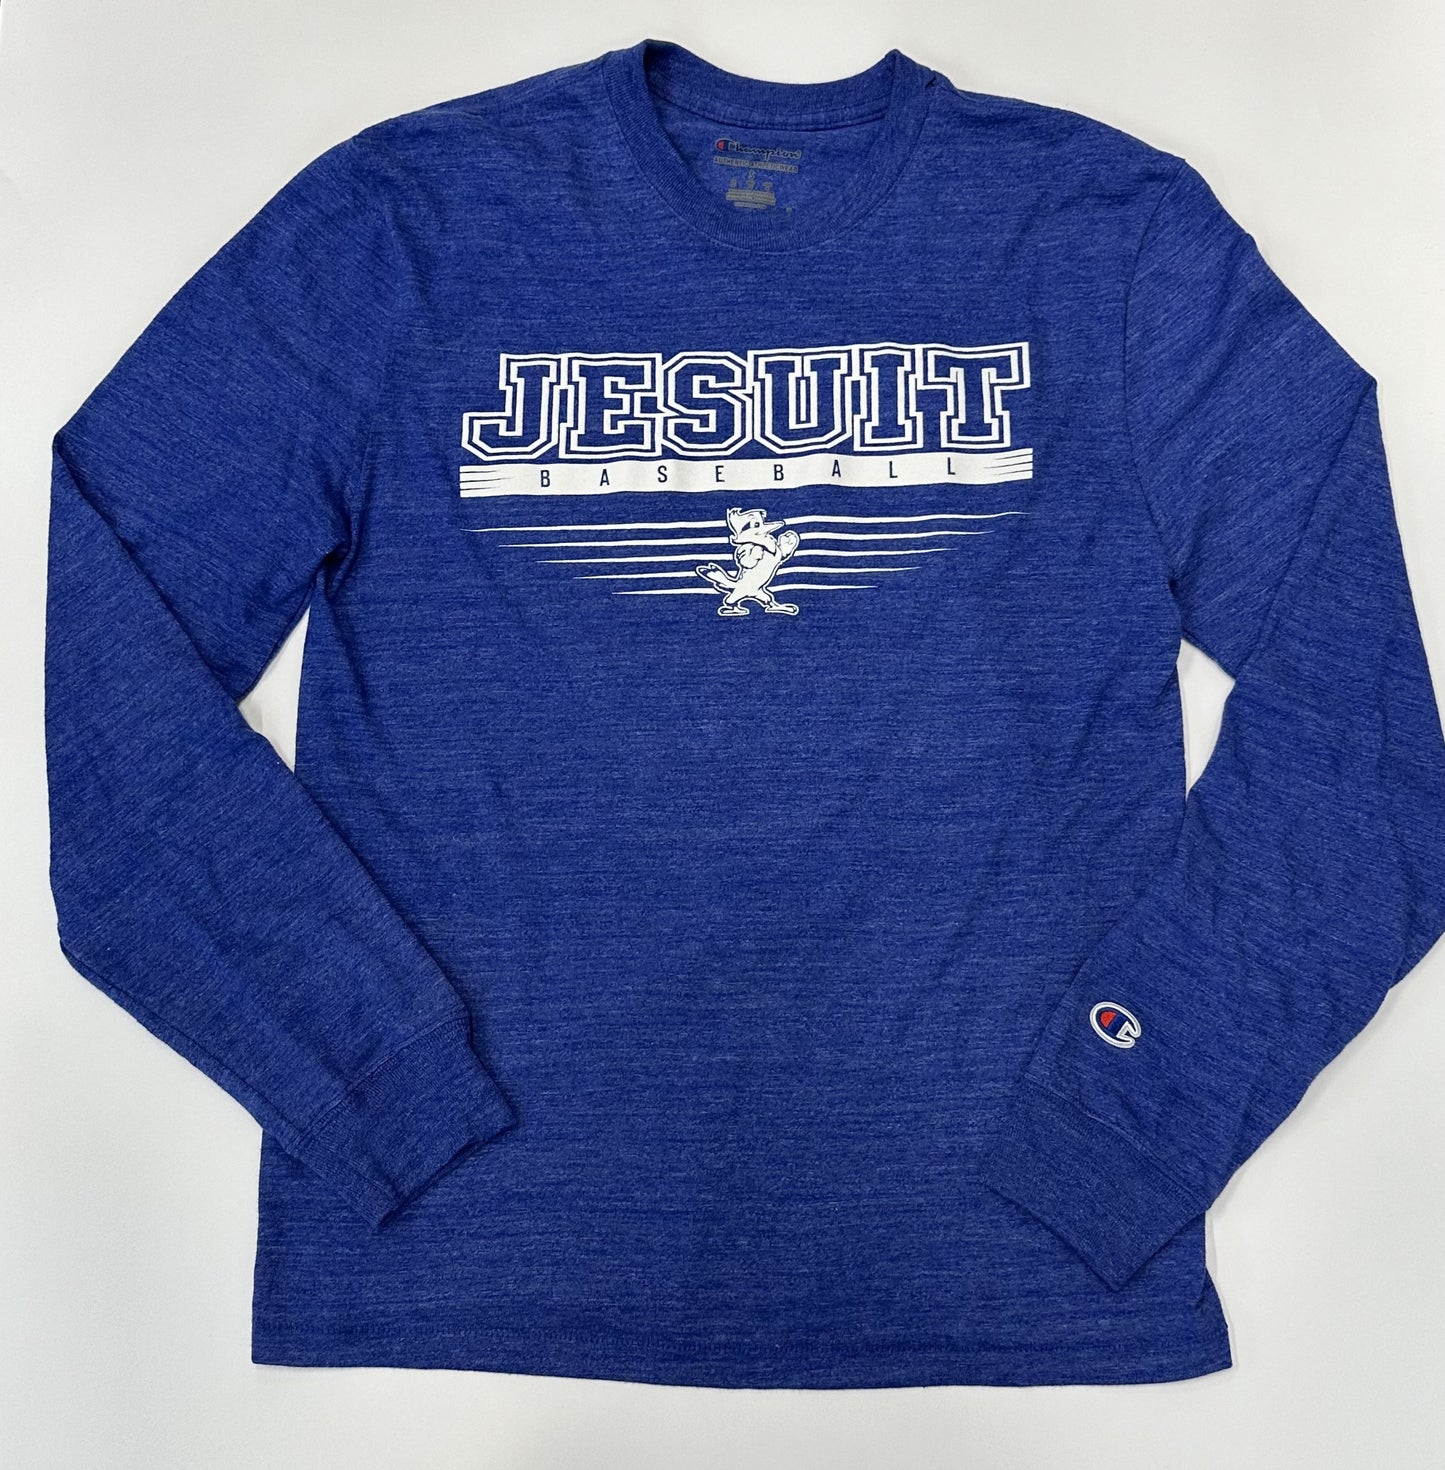 Champion.  50% Polyester/37% Cotton/13% Rayon Jersey. 1 x 1 rib at collar & cuffs. Set in long sleeve and straight body. Jesuit Baseball logo.